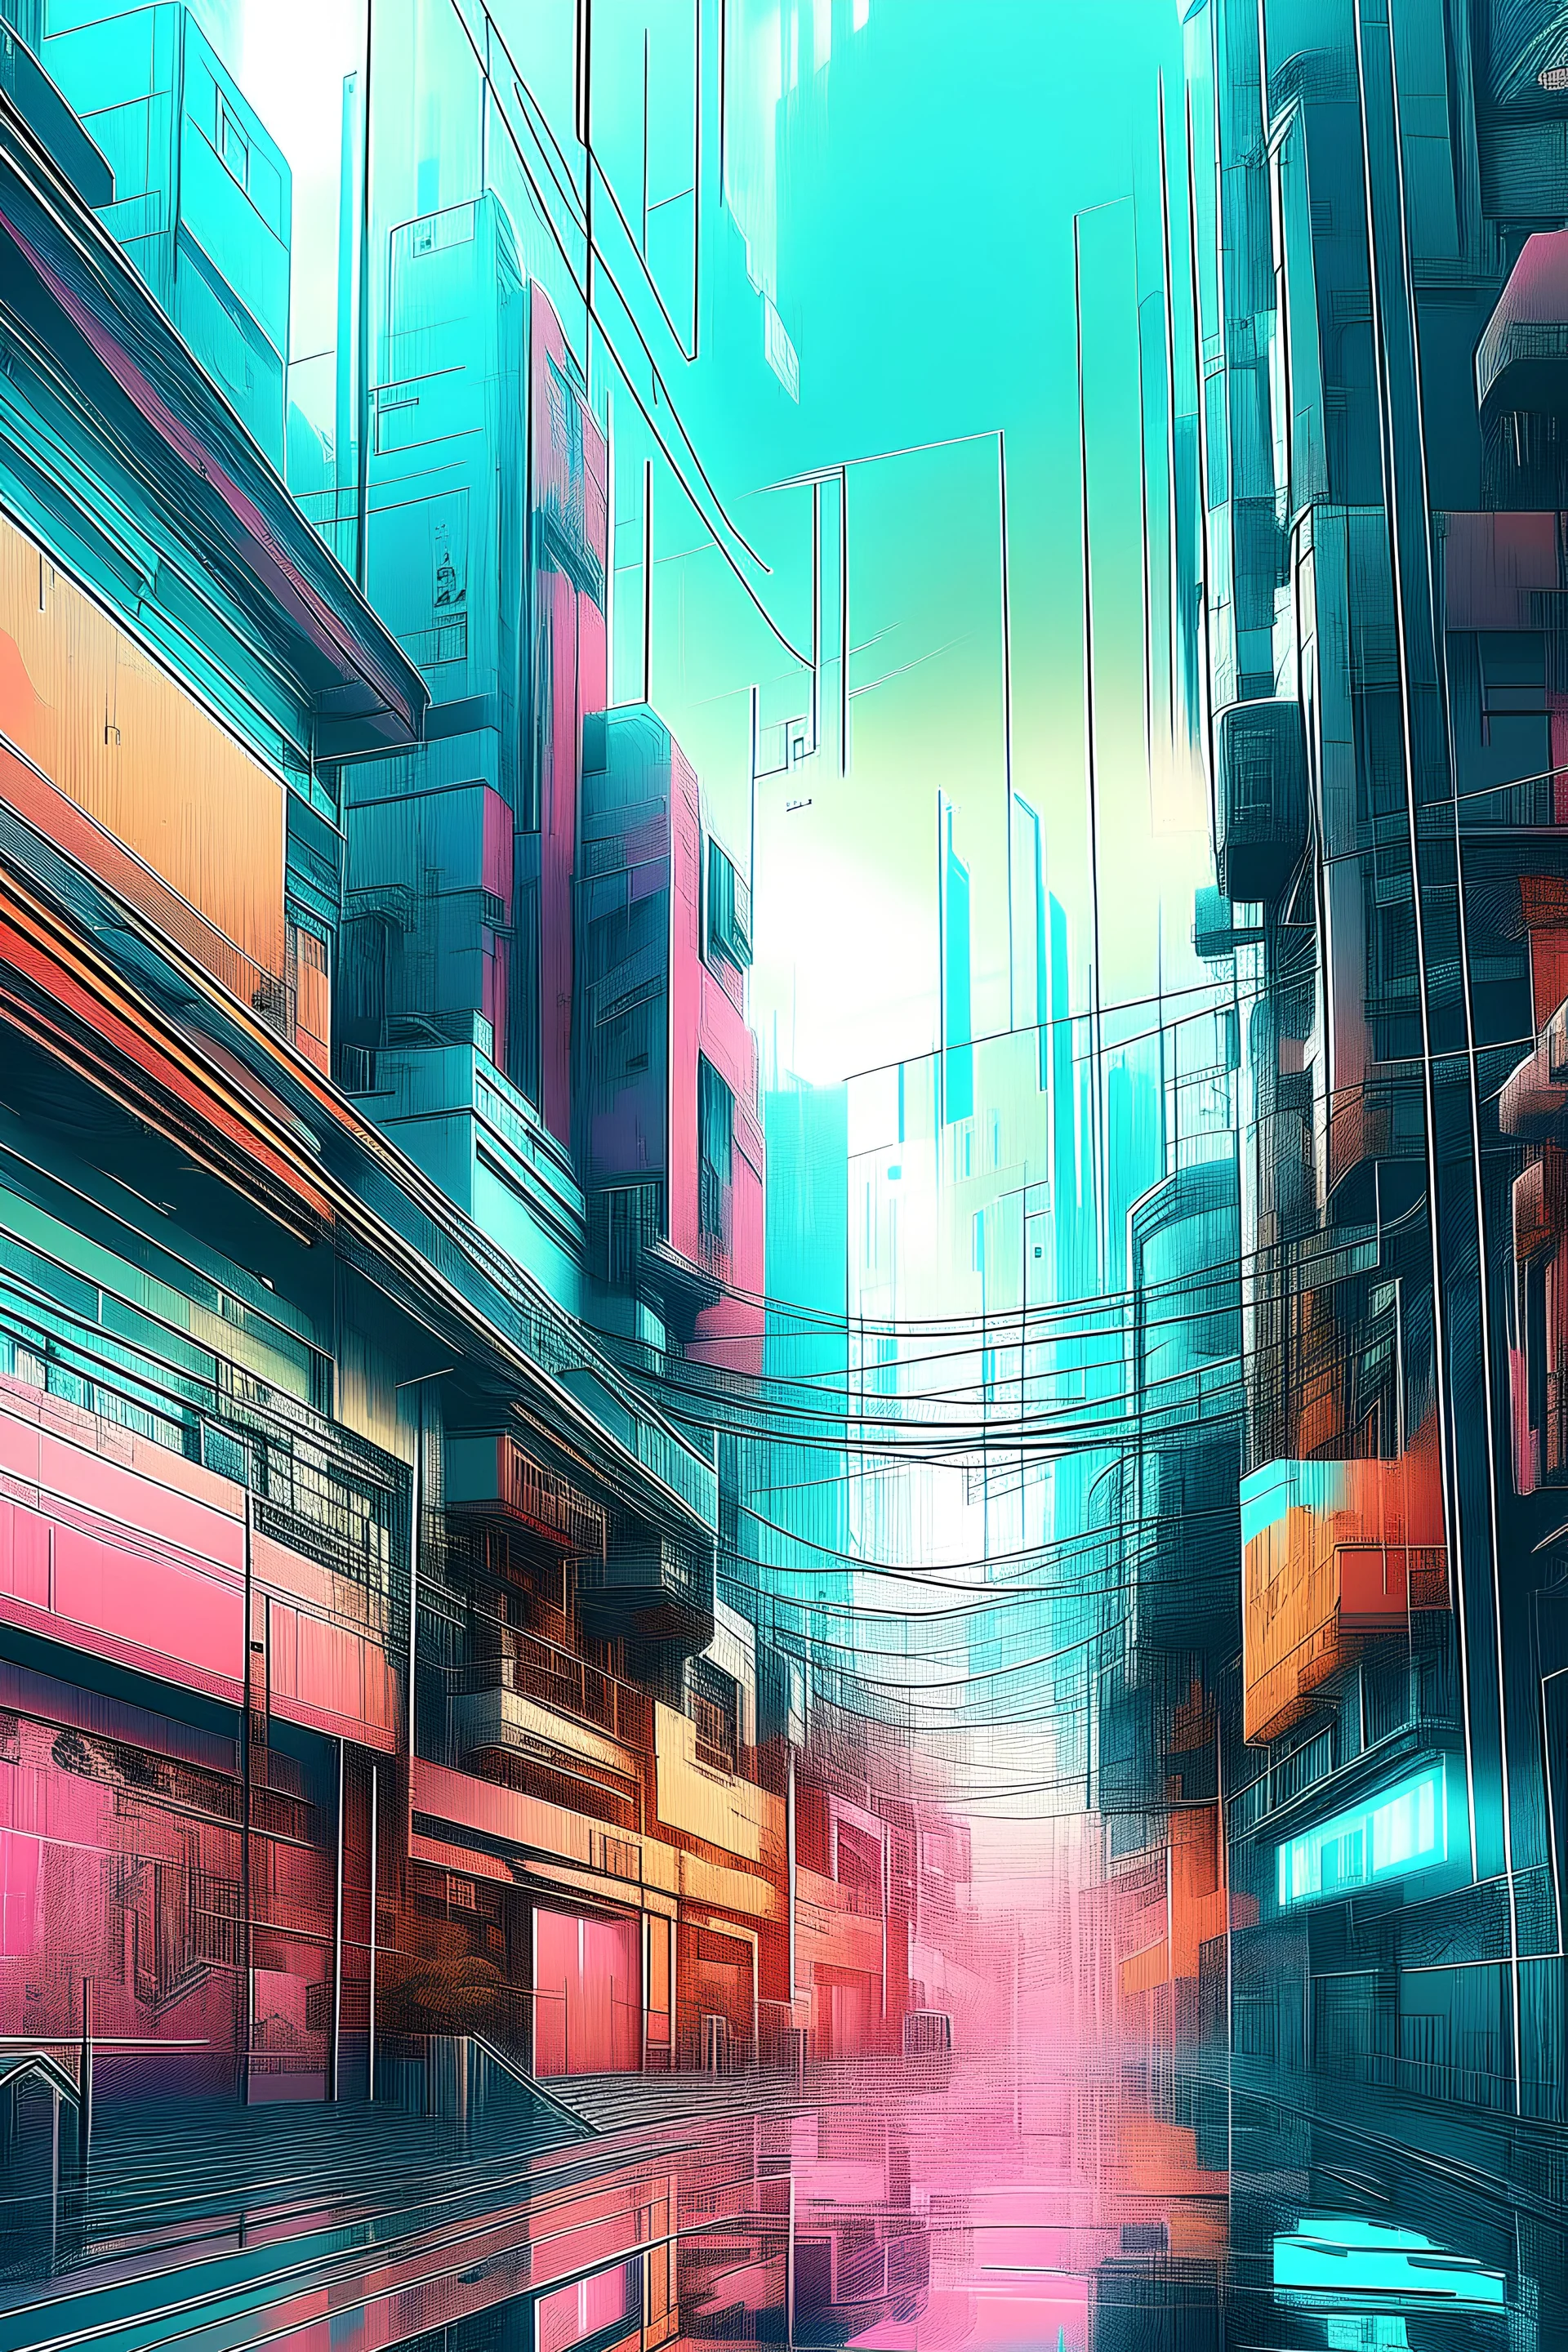 an innovative mixed media style digital art combining 3D, glitch art, and photography. Feature futuristic cityscapes with unexpected textures, layers, and dimensions.